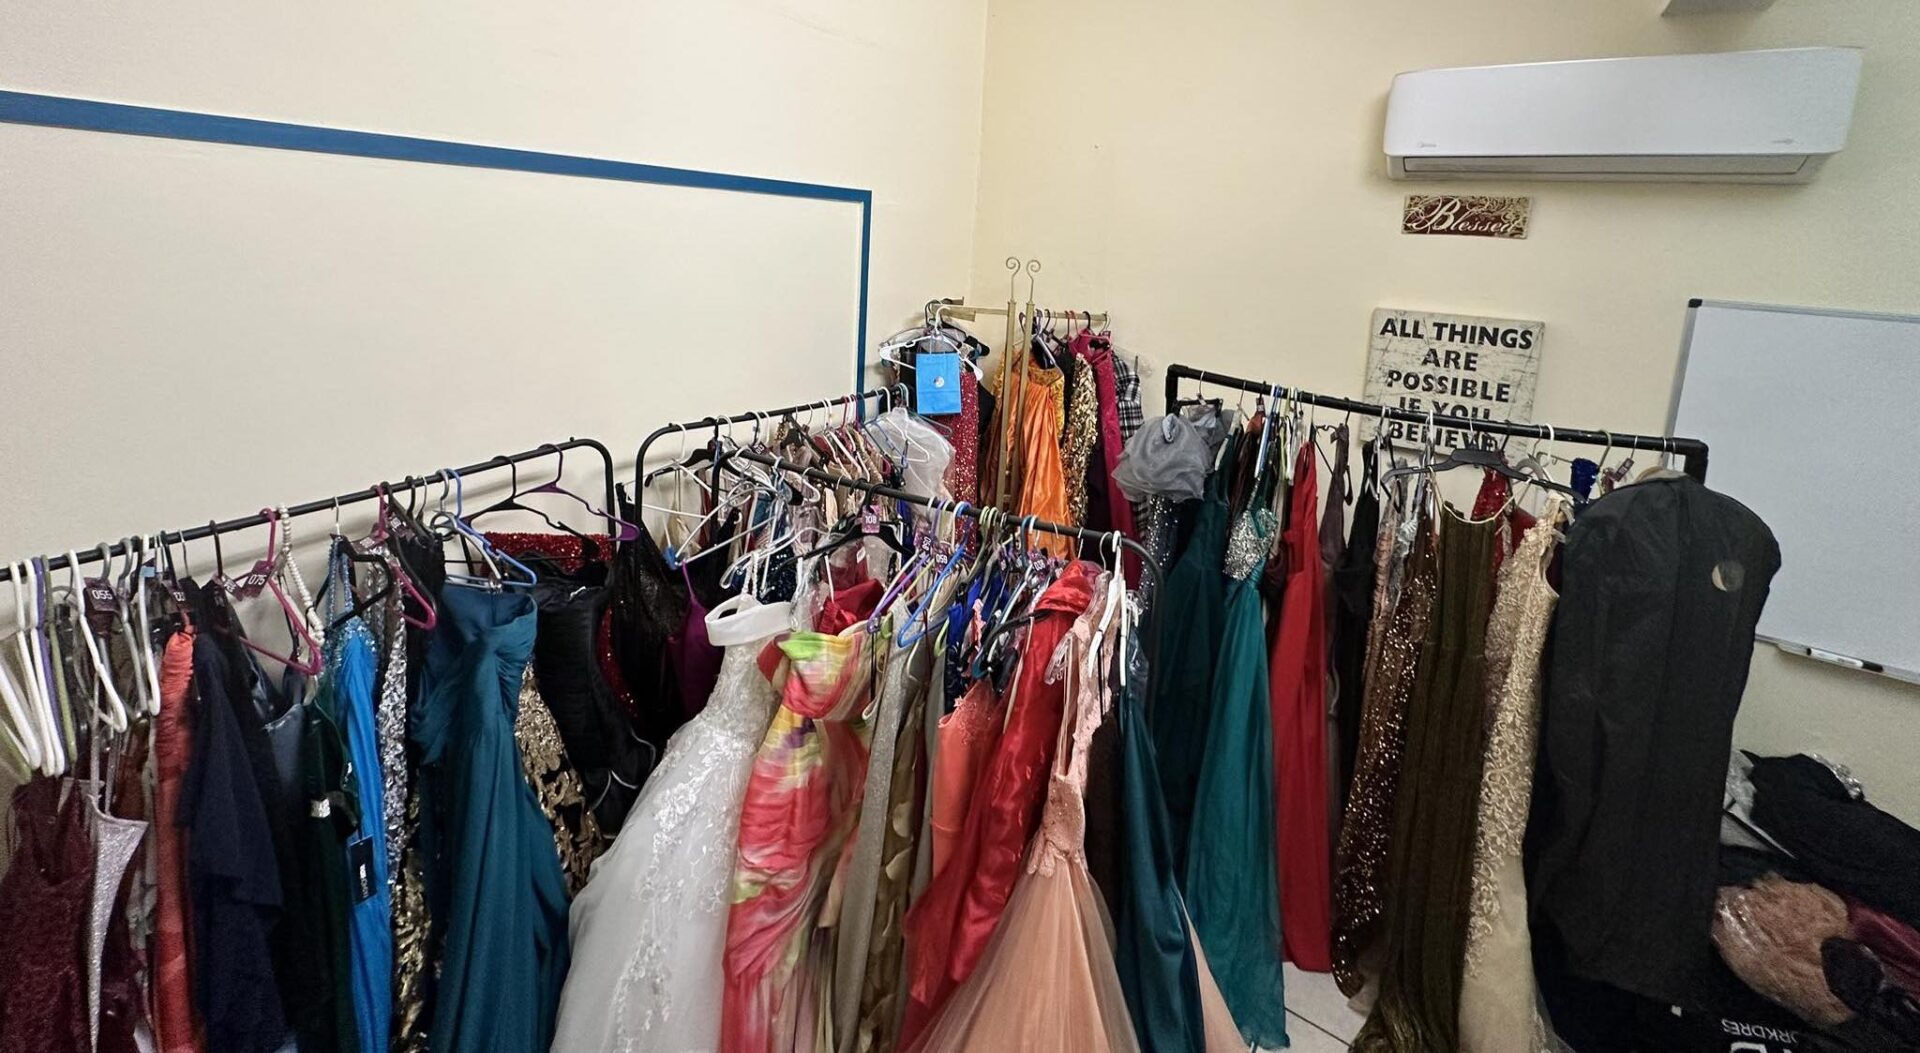 Prom Drive on STX Distributes Over 67 Dresses for Free | St. Croix Source